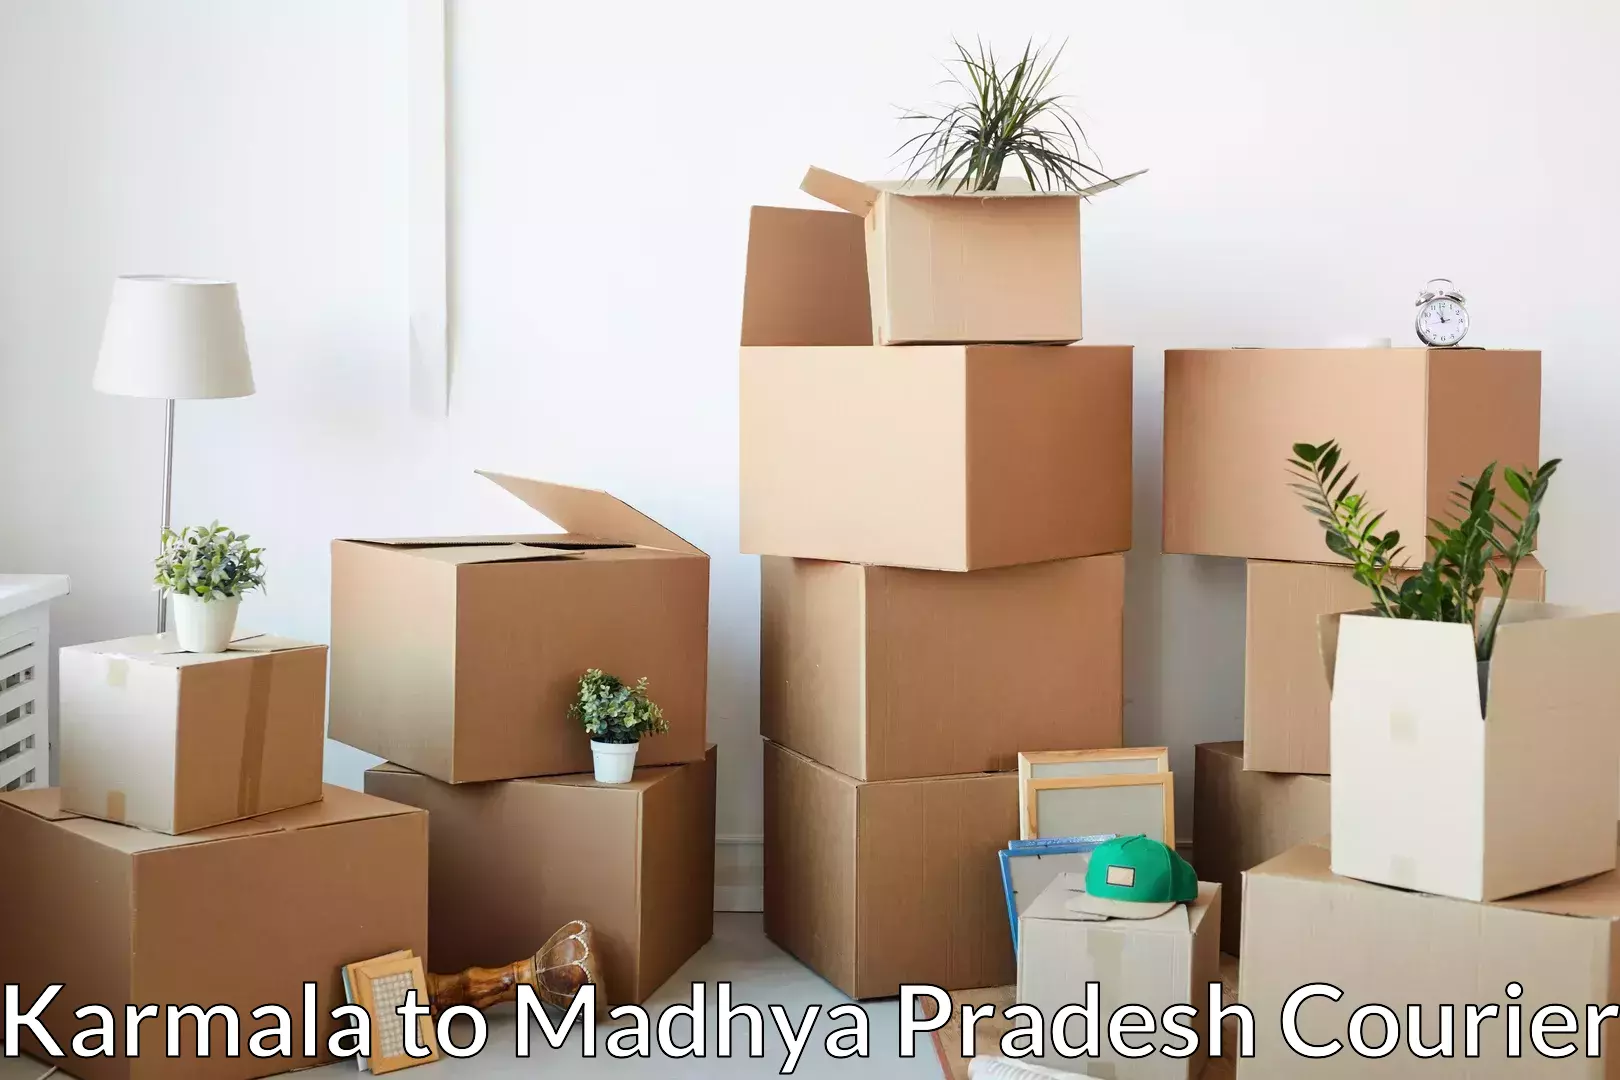 Moving and storage services in Karmala to Jaisinghnagar